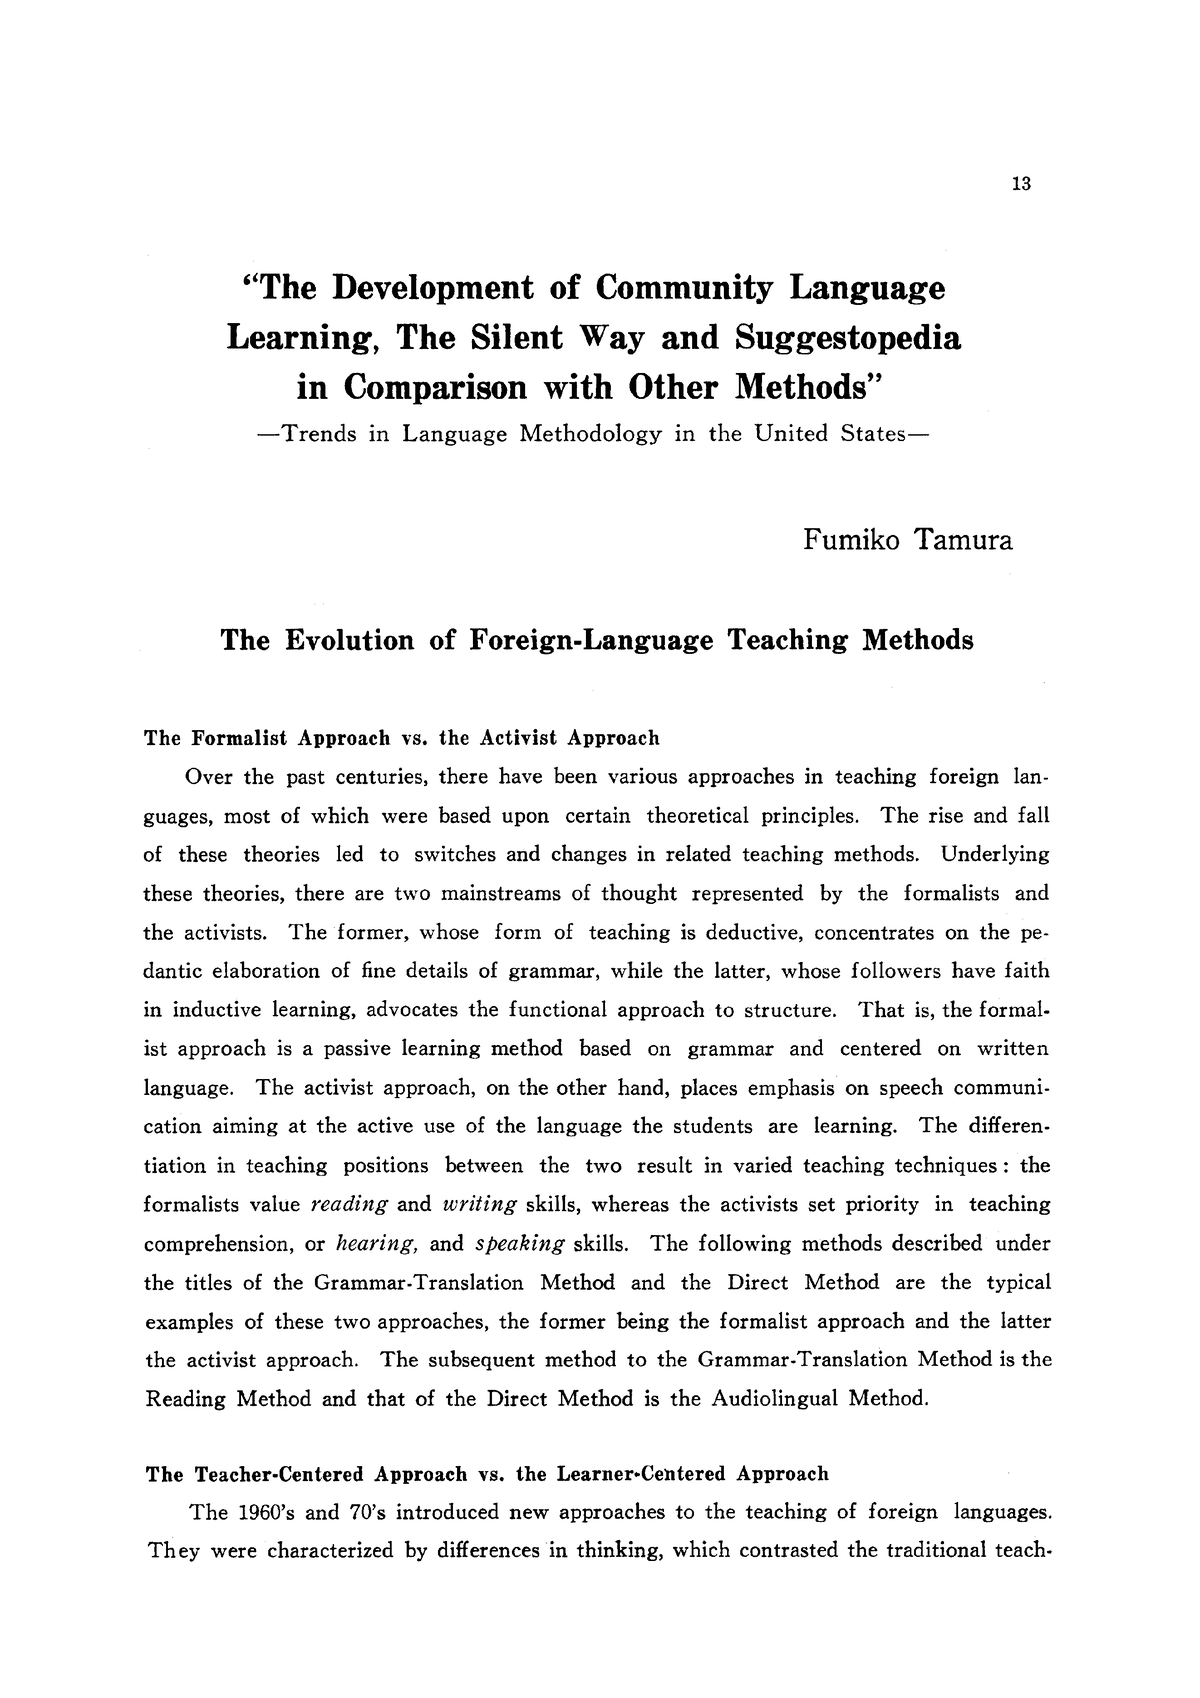 essay about methods of language teaching